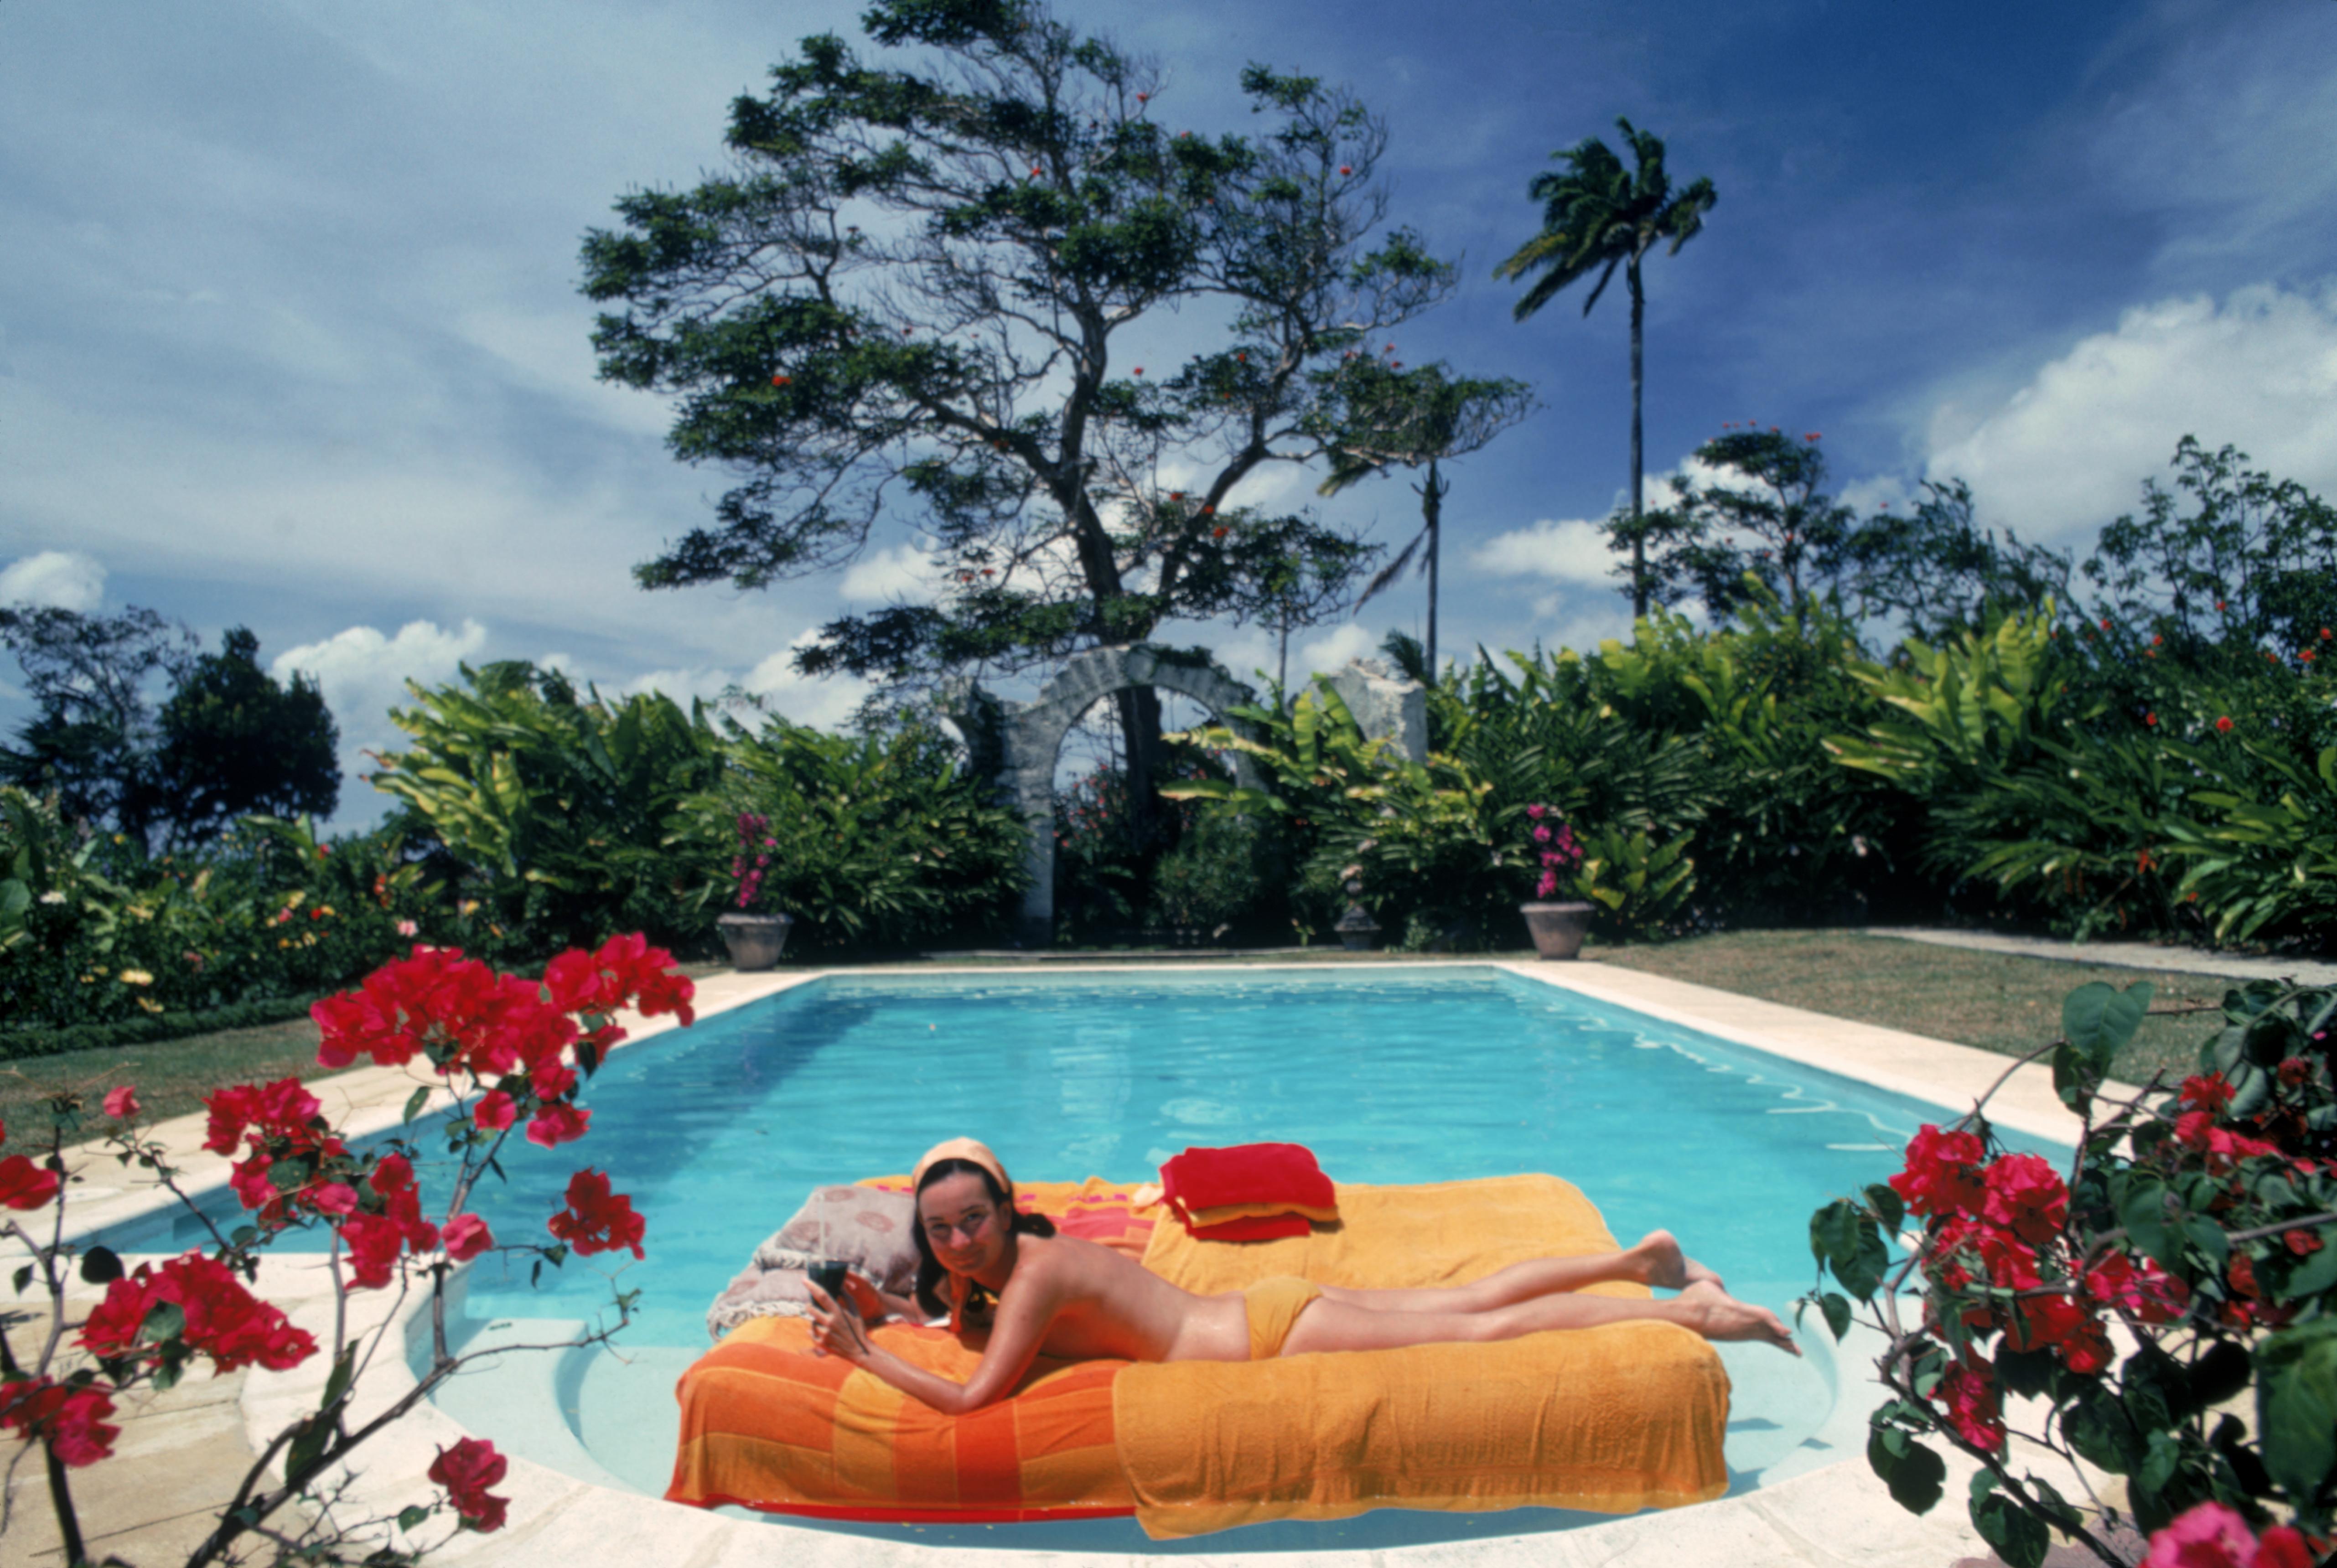 'Sunbathing In Barbados' 1976 Slim Aarons Limited Estate Edition Print 

The former Pauline Haywood sunbathing on a lilo in a swimming pool designed by English artist Oliver Messel, Barbados, April 1976. Her family owned Haywood's Plantation.